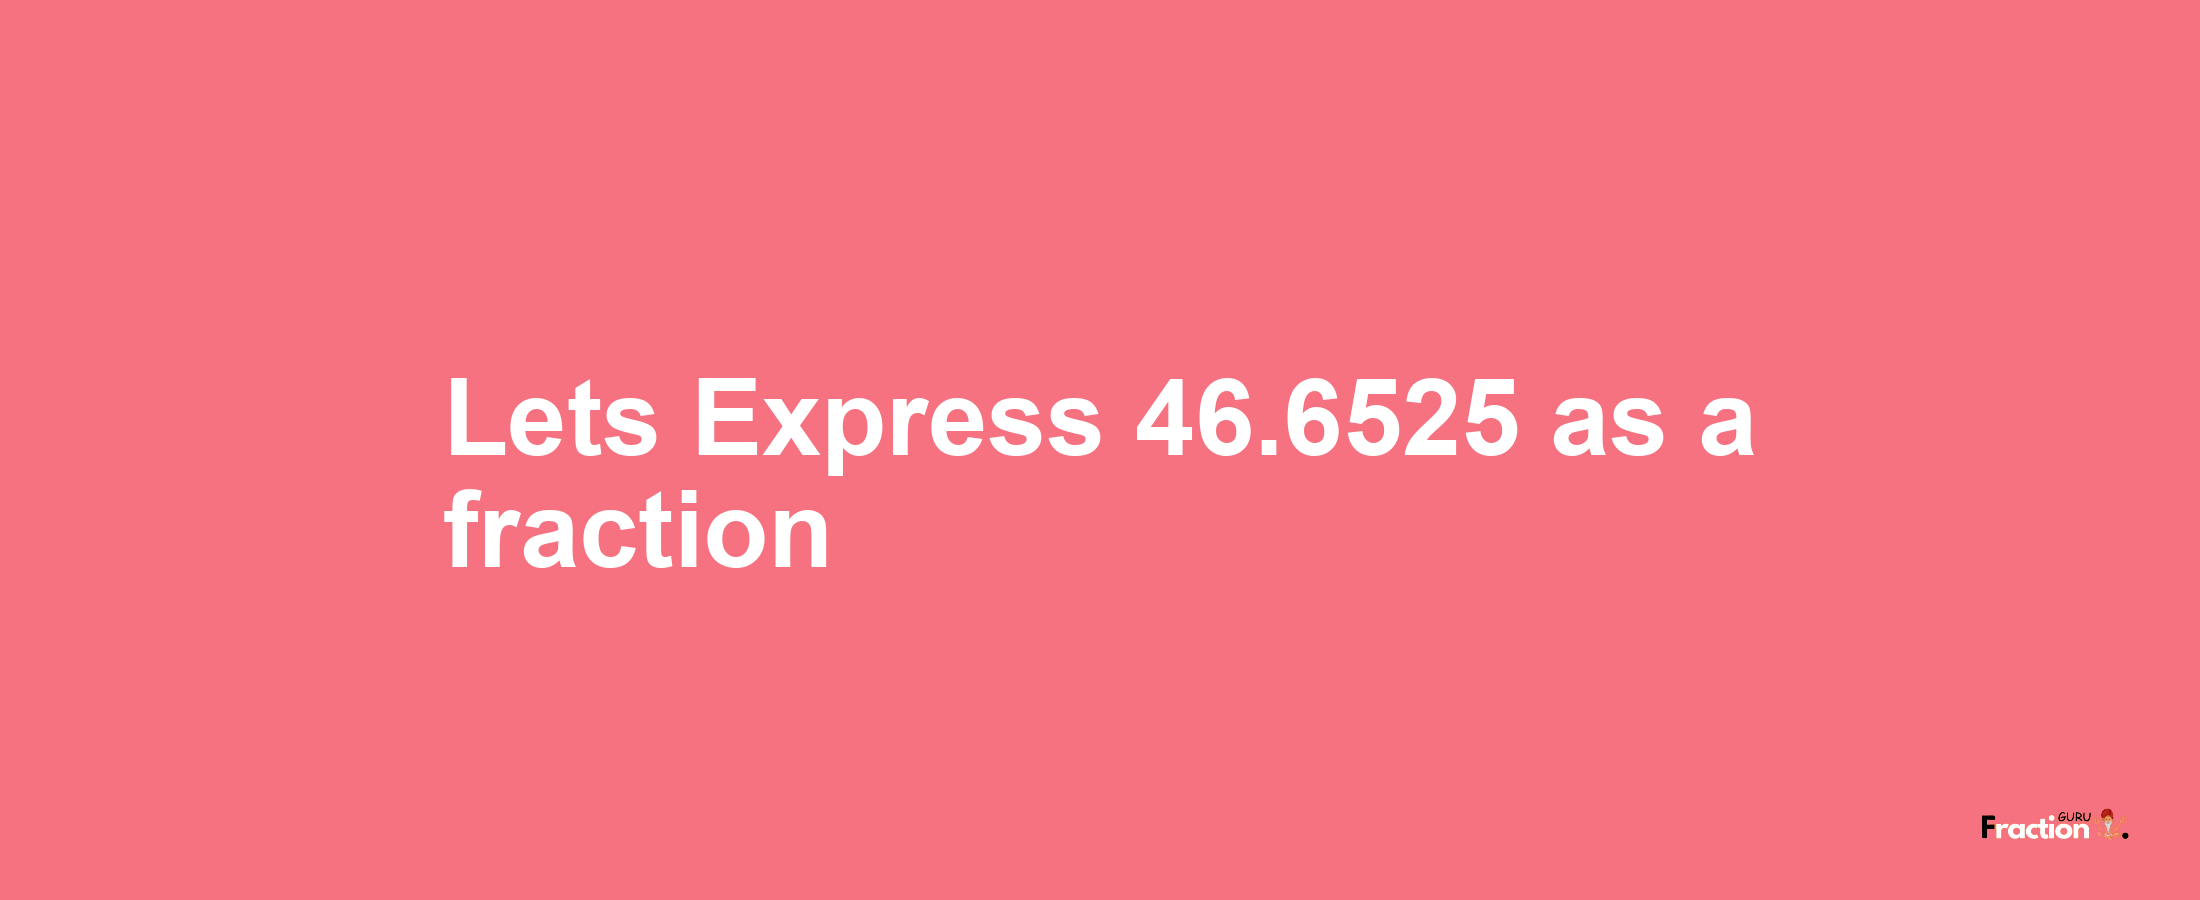 Lets Express 46.6525 as afraction